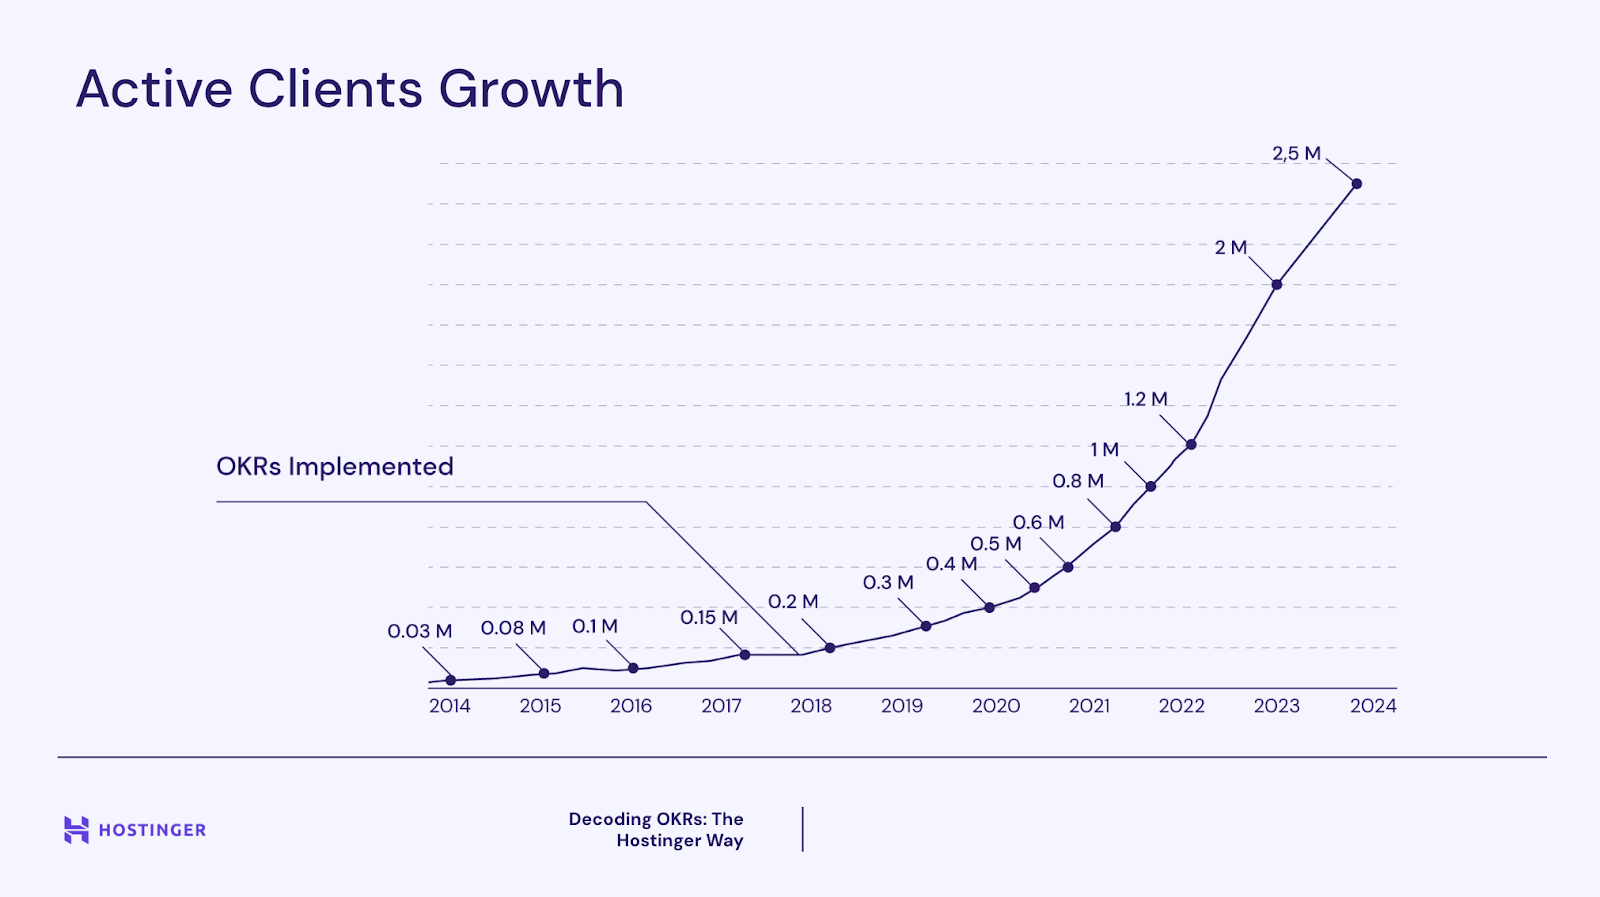 Active clients growth diagram from 2014 to 2024